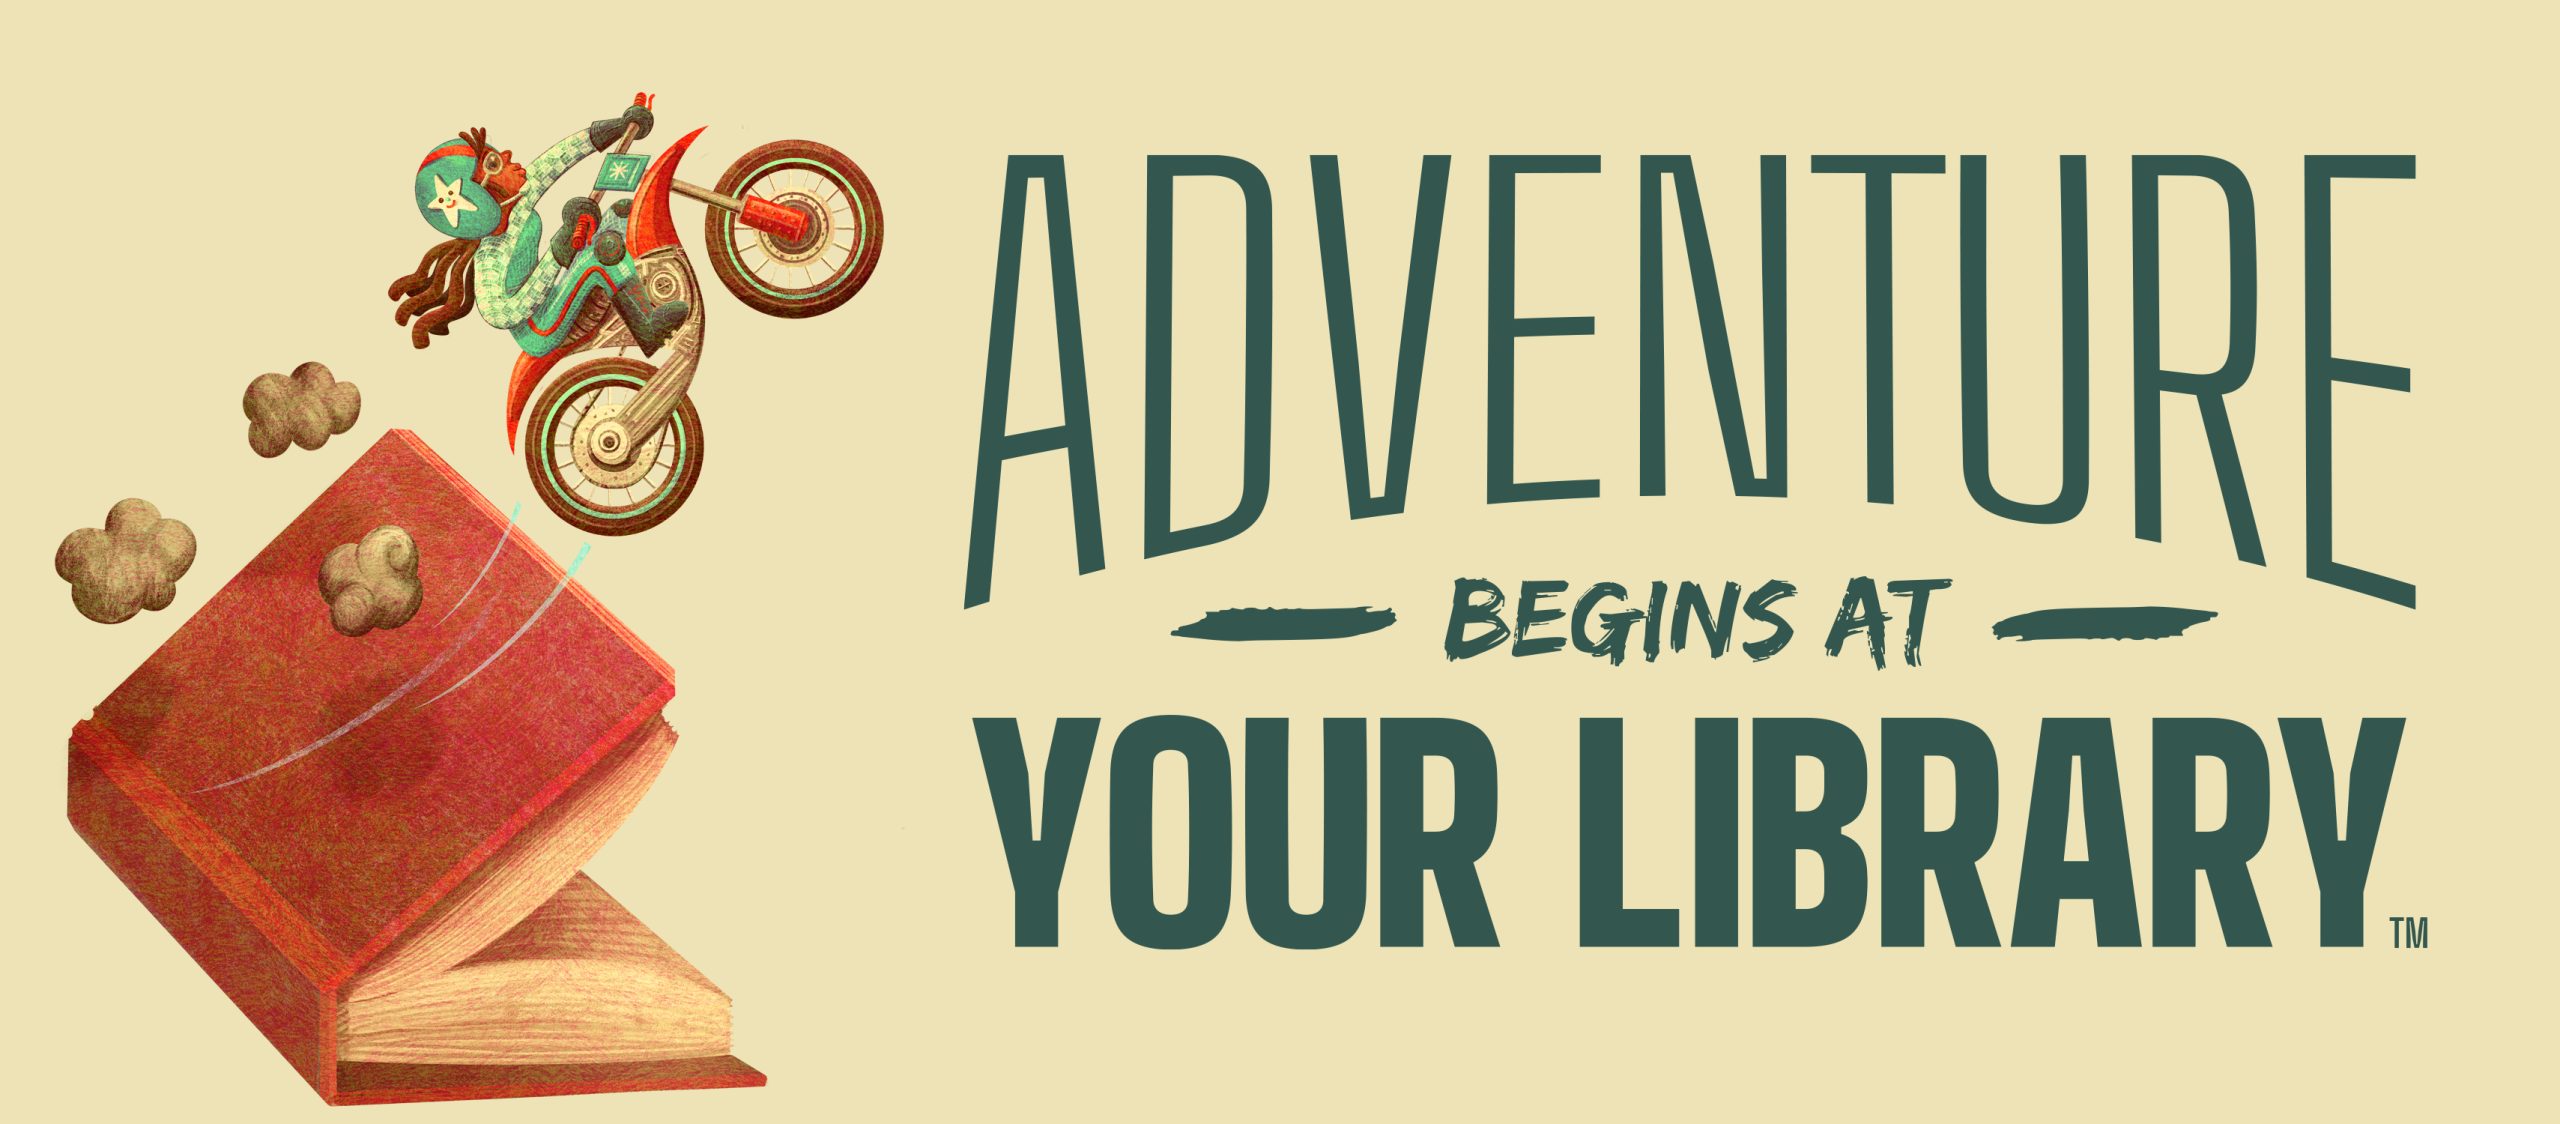 Adventure Begins at Your Library logo. A girl rides a motorbike up a ramp made of a book.